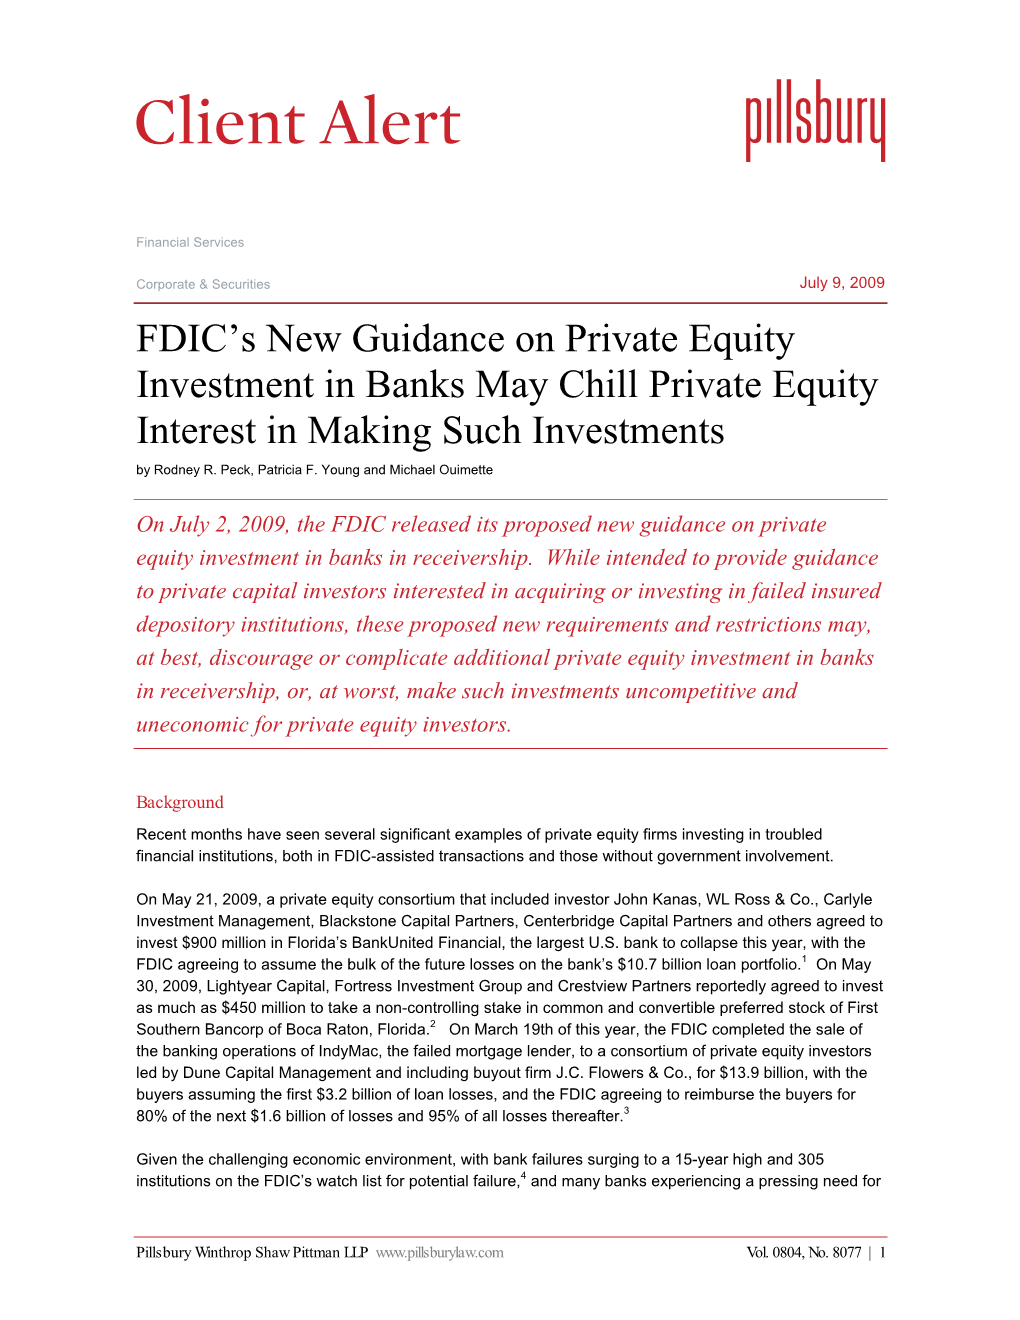 FDIC's New Guidance on Private Equity Investment in Banks May Chill Private Equity Interest in Making Such Investments